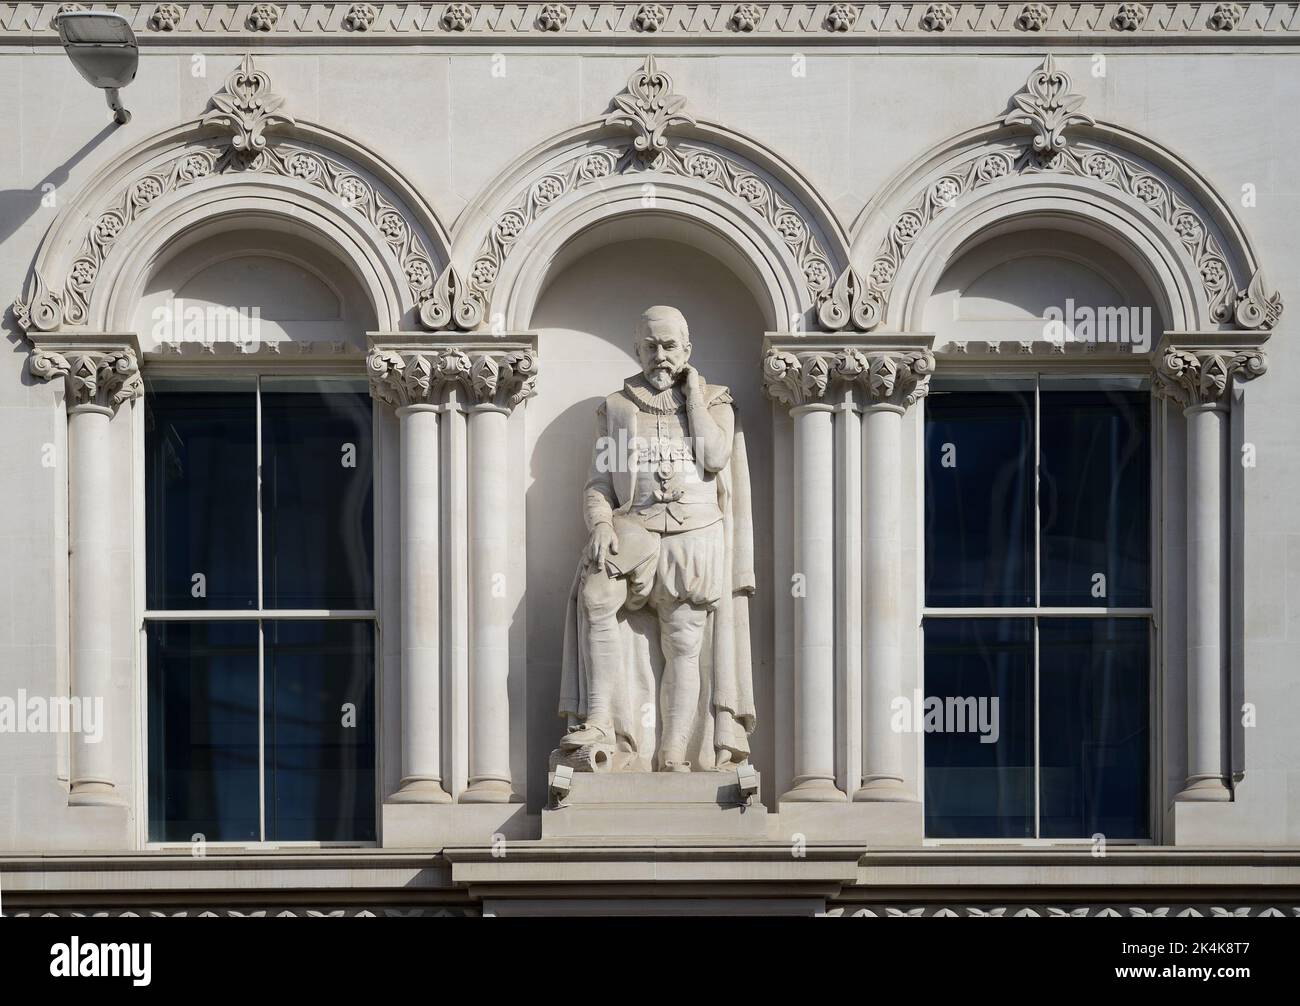 London, England, UK. Statue overlooking Holborn Viaduct: Sir Hugh Myddleton (1560-1631 - founder of the New River Company) Stock Photo